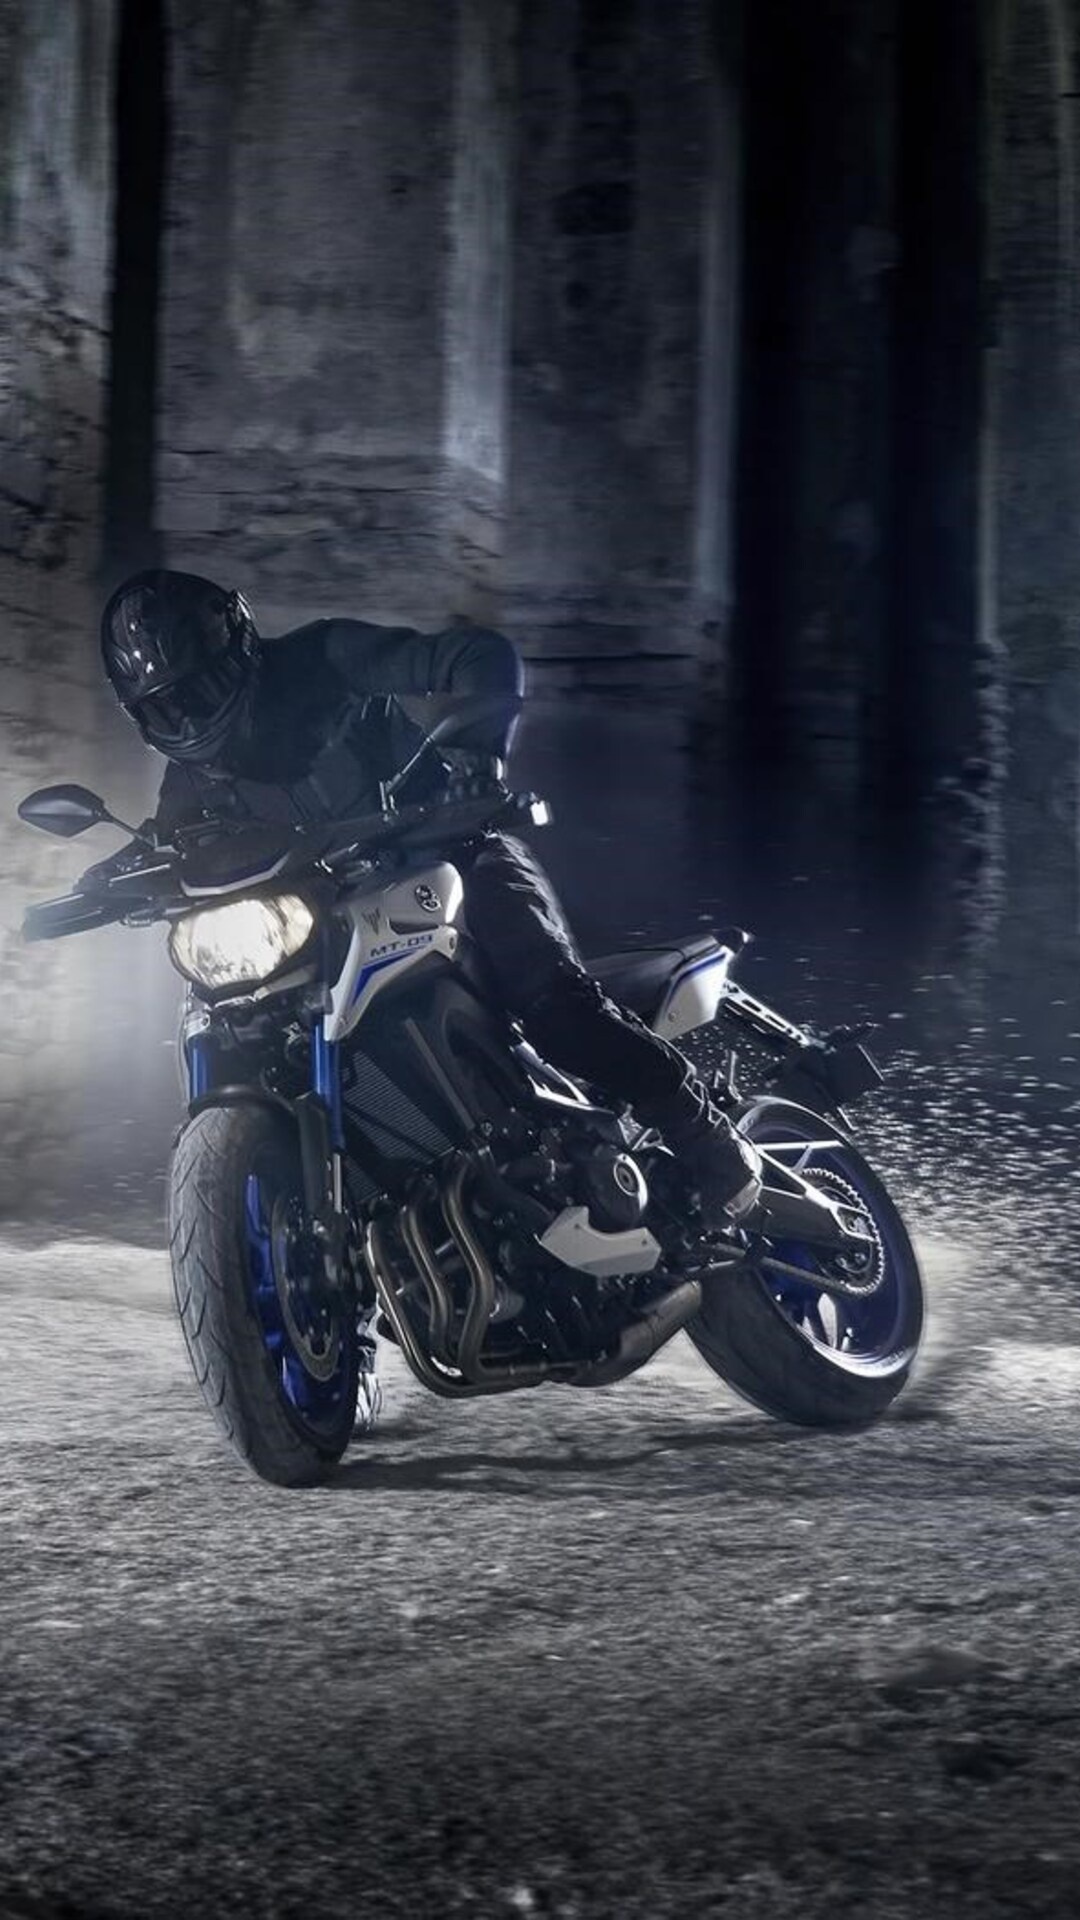 Yamaha MT-09, Mobile wallpapers, HQ images, Photography collection, 1080x1920 Full HD Handy